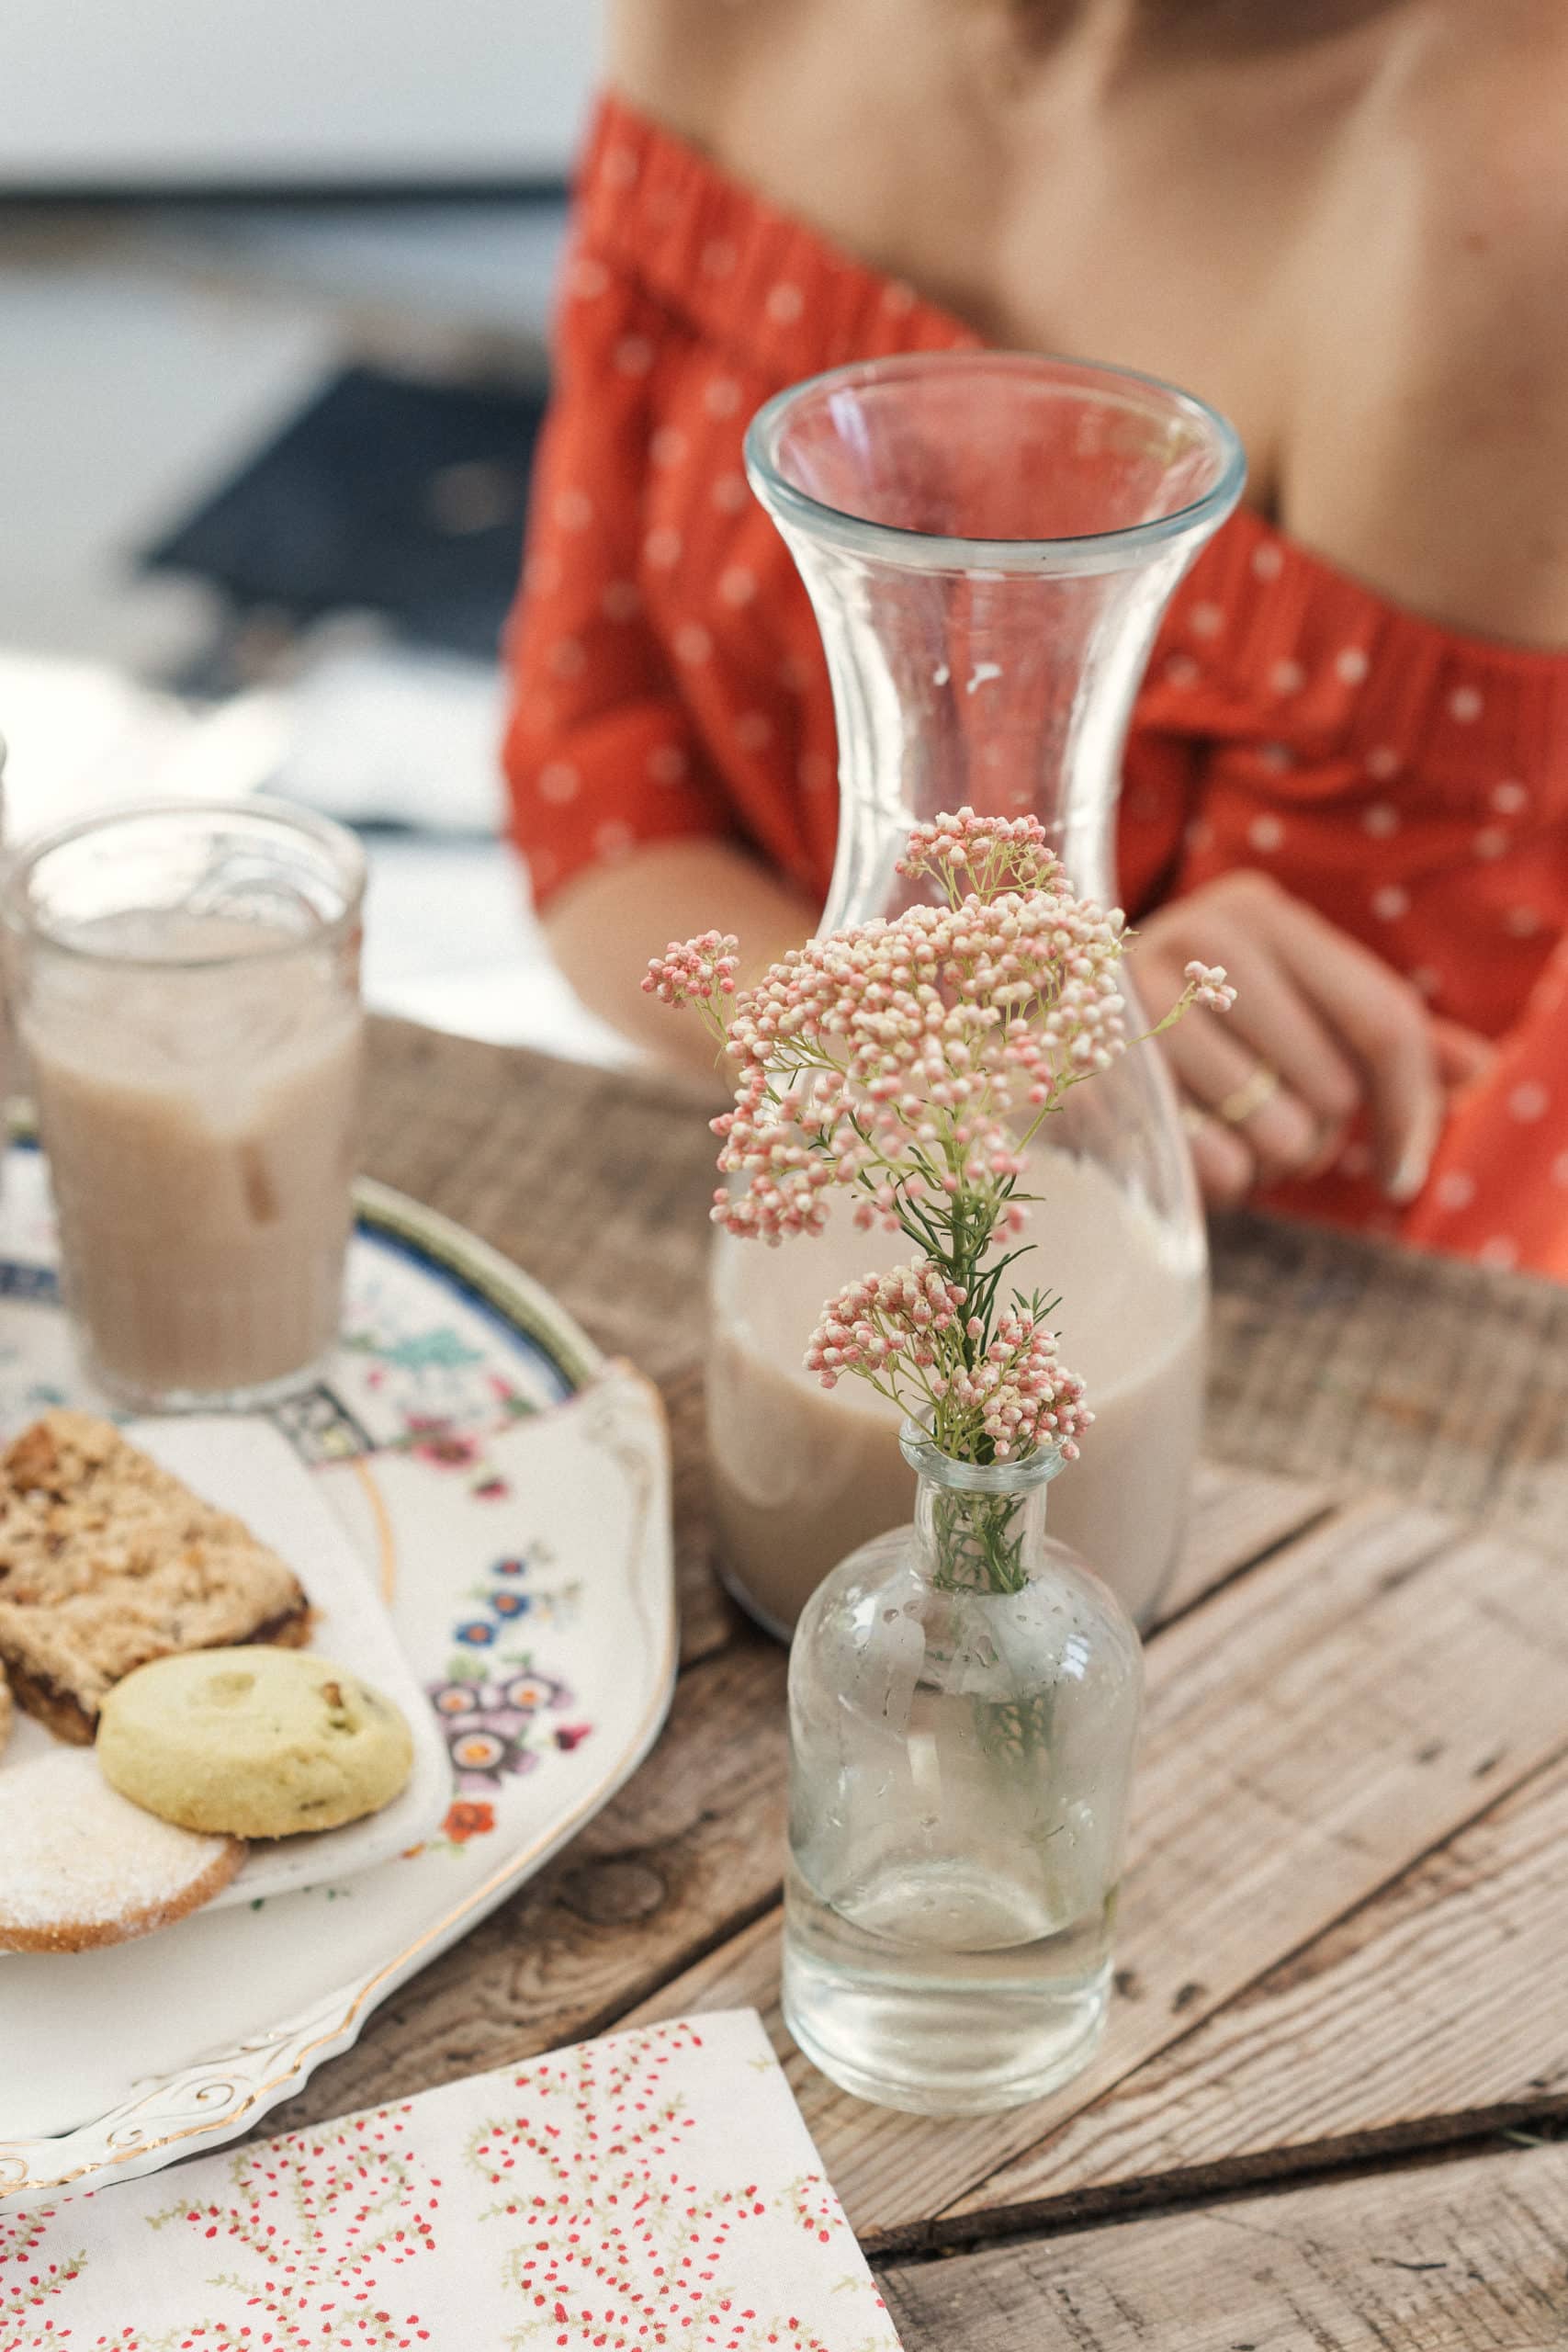 Louise Roe recipe for Iced Hibiscus Latte